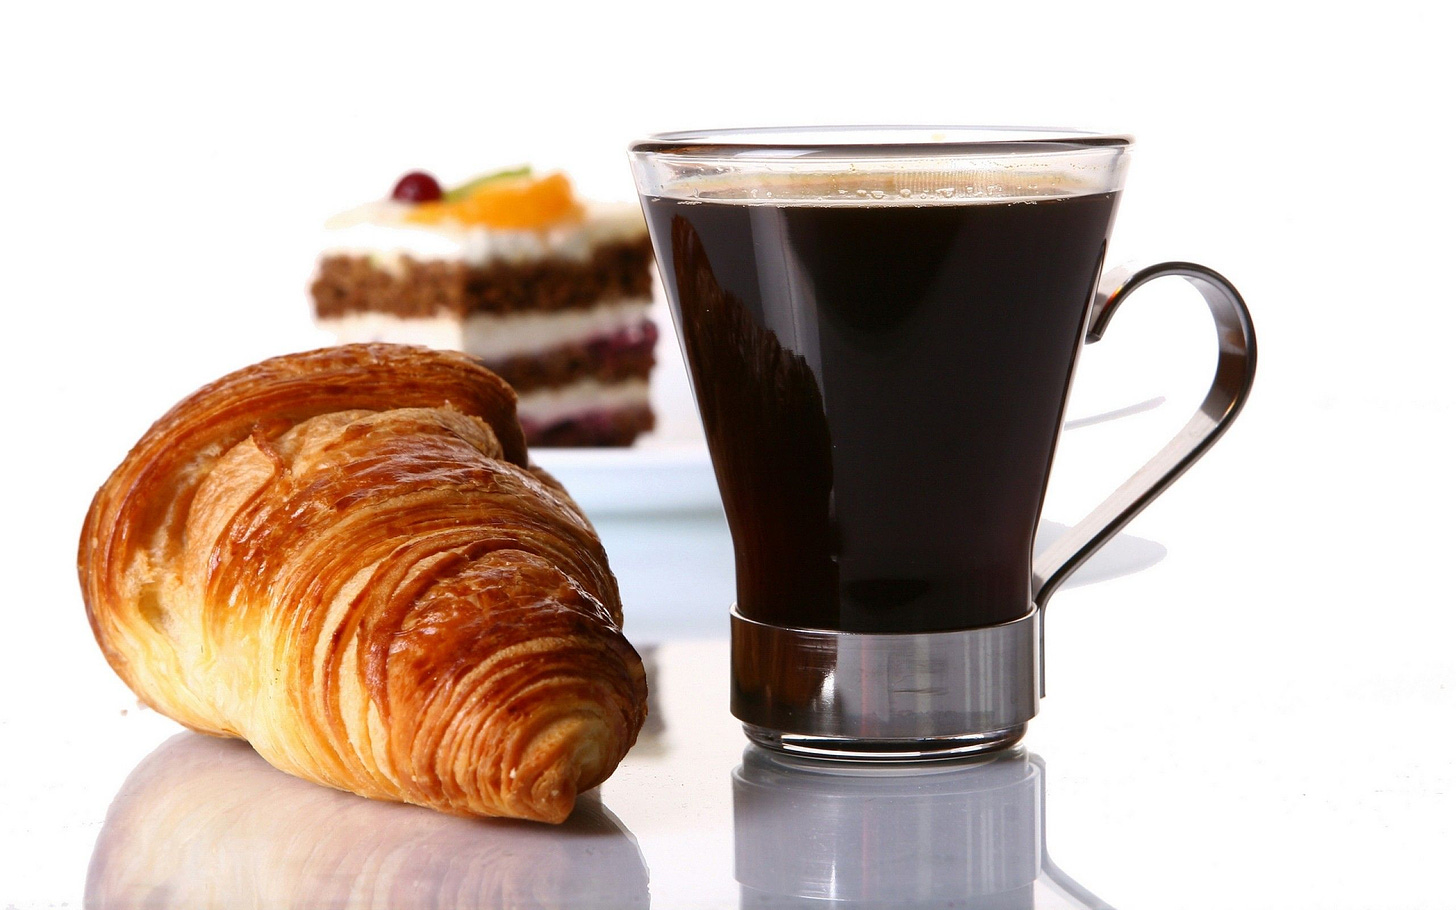 Wallpaper Download 2560x1600 Delicious breakfast - croissant and dark coffee  | Coffee recipes, Yummy breakfast, Croissant breakfast